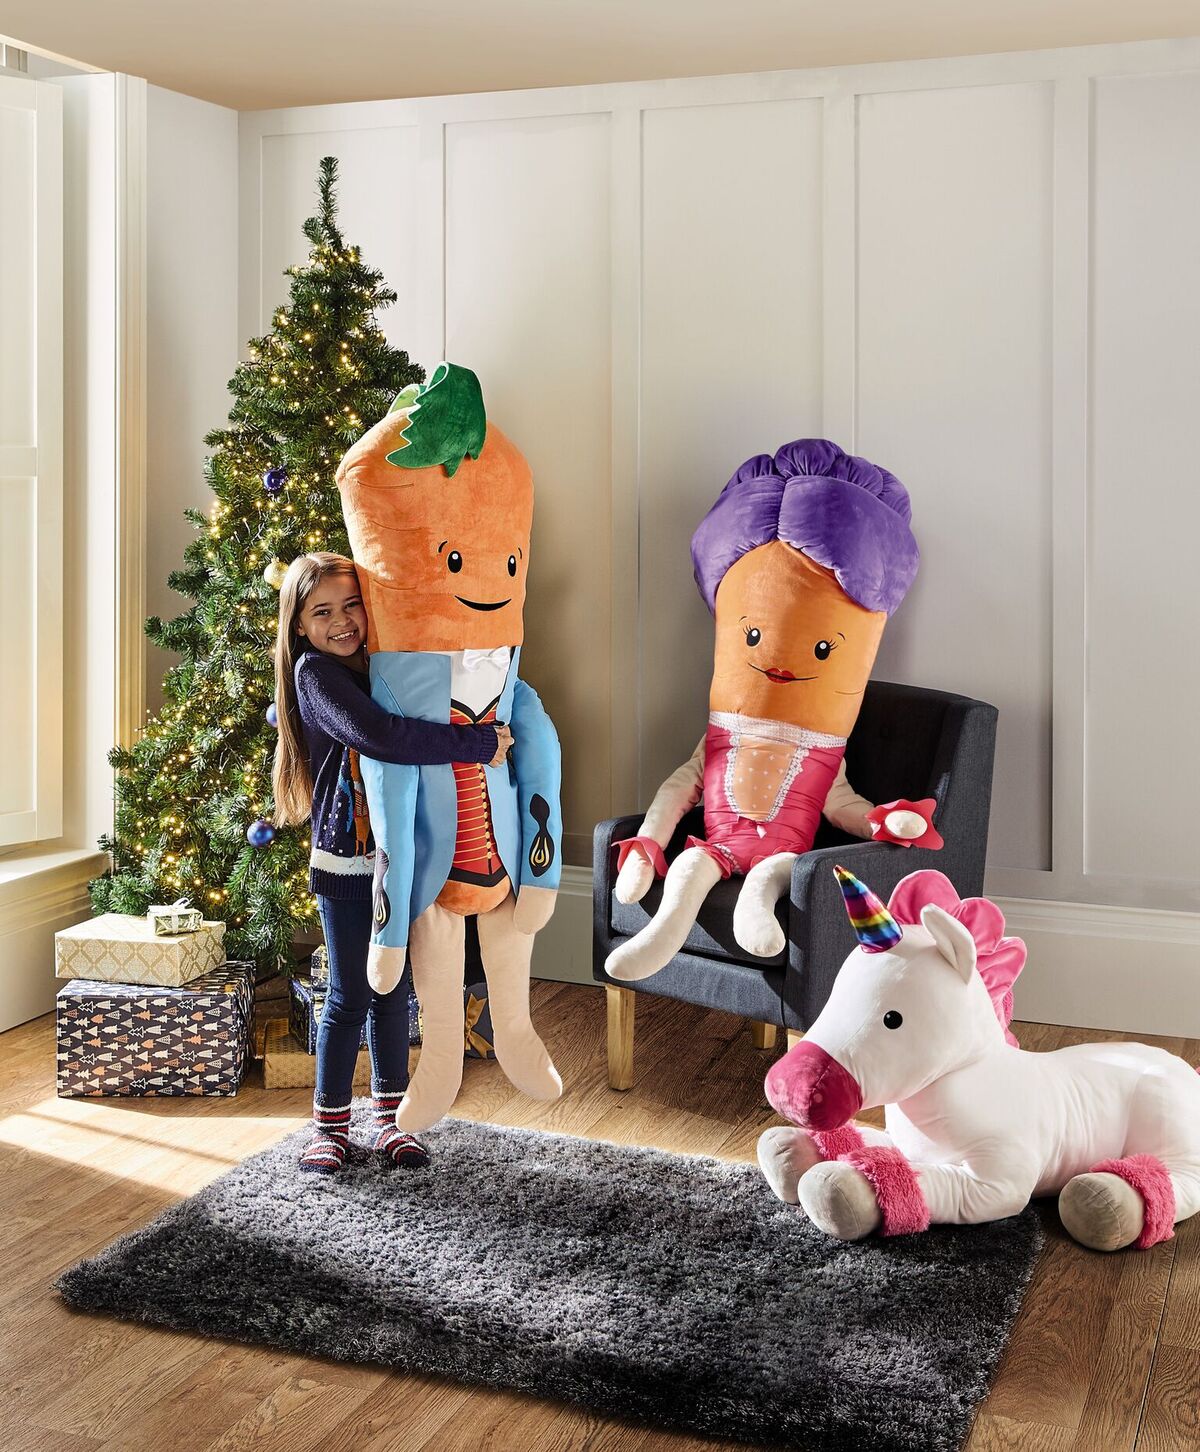 ALDI KEVIN THE CARROT CHRISTMAS CHILD'S/KID'S PYJAMAS NEW SIZE 3-4 YEARS UNISEX 